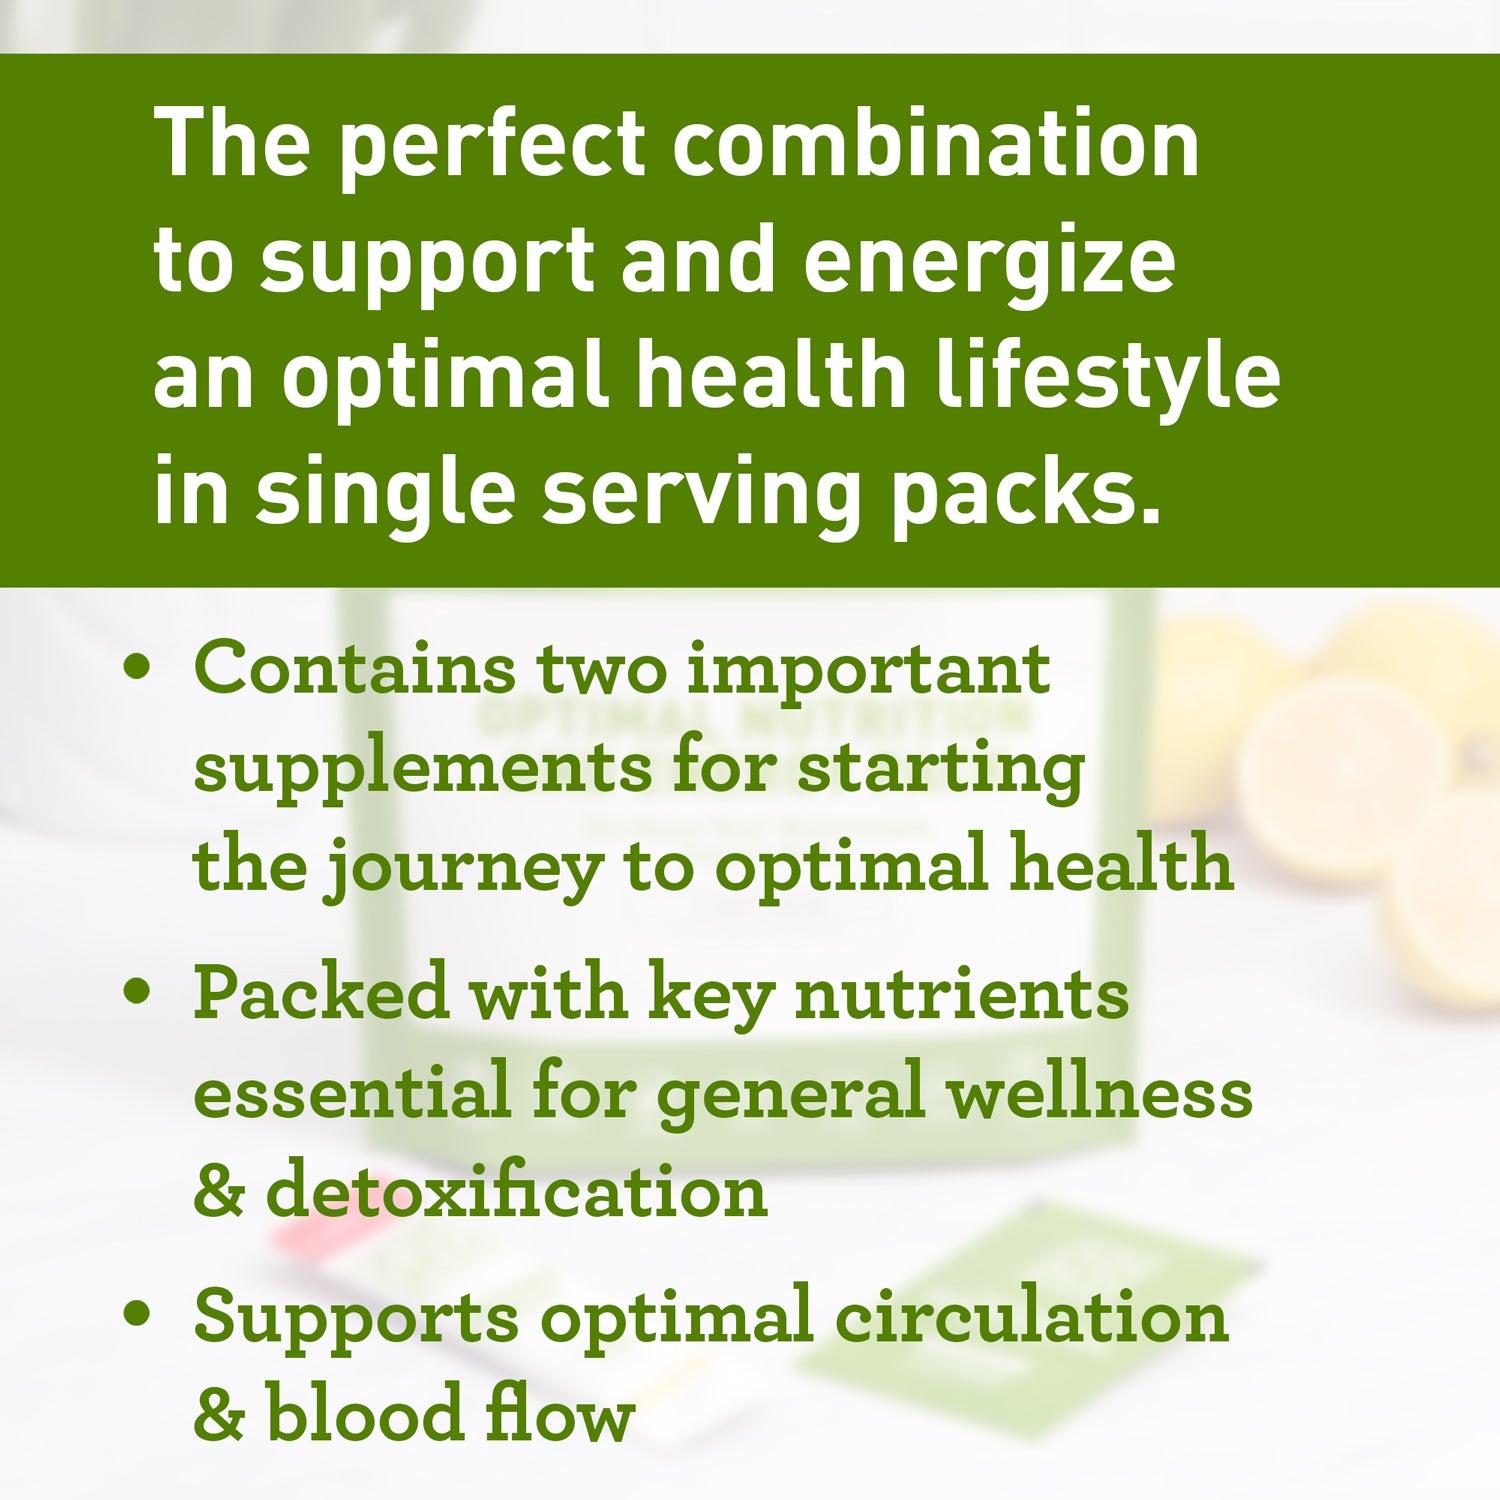 Optimal Nutrition and Energy Pack - Contain Two Important Supplement, Packed with Key Nutrients, Supports Optimal Circulation - Amy Myers MD